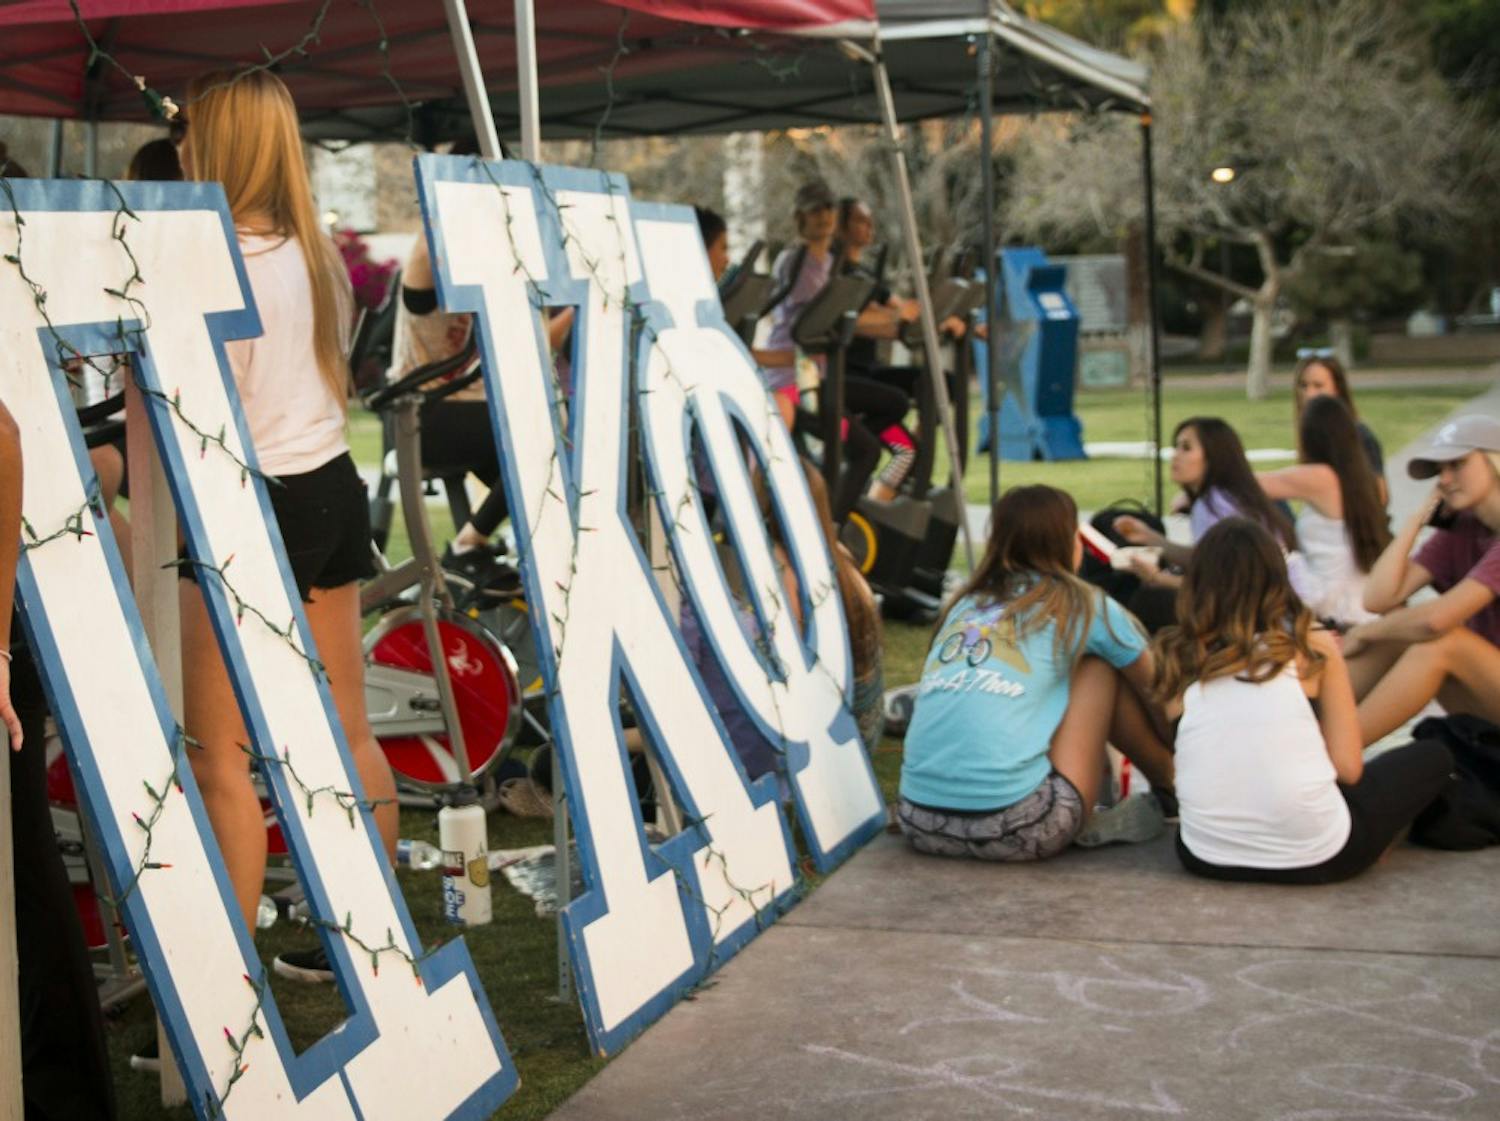 ASU students participate in Pi Kappa Phi's annual event, Bike-A-Thon, at Hayden Lawn at ASU's Tempe campus on Wednesday, March 29, 2017.